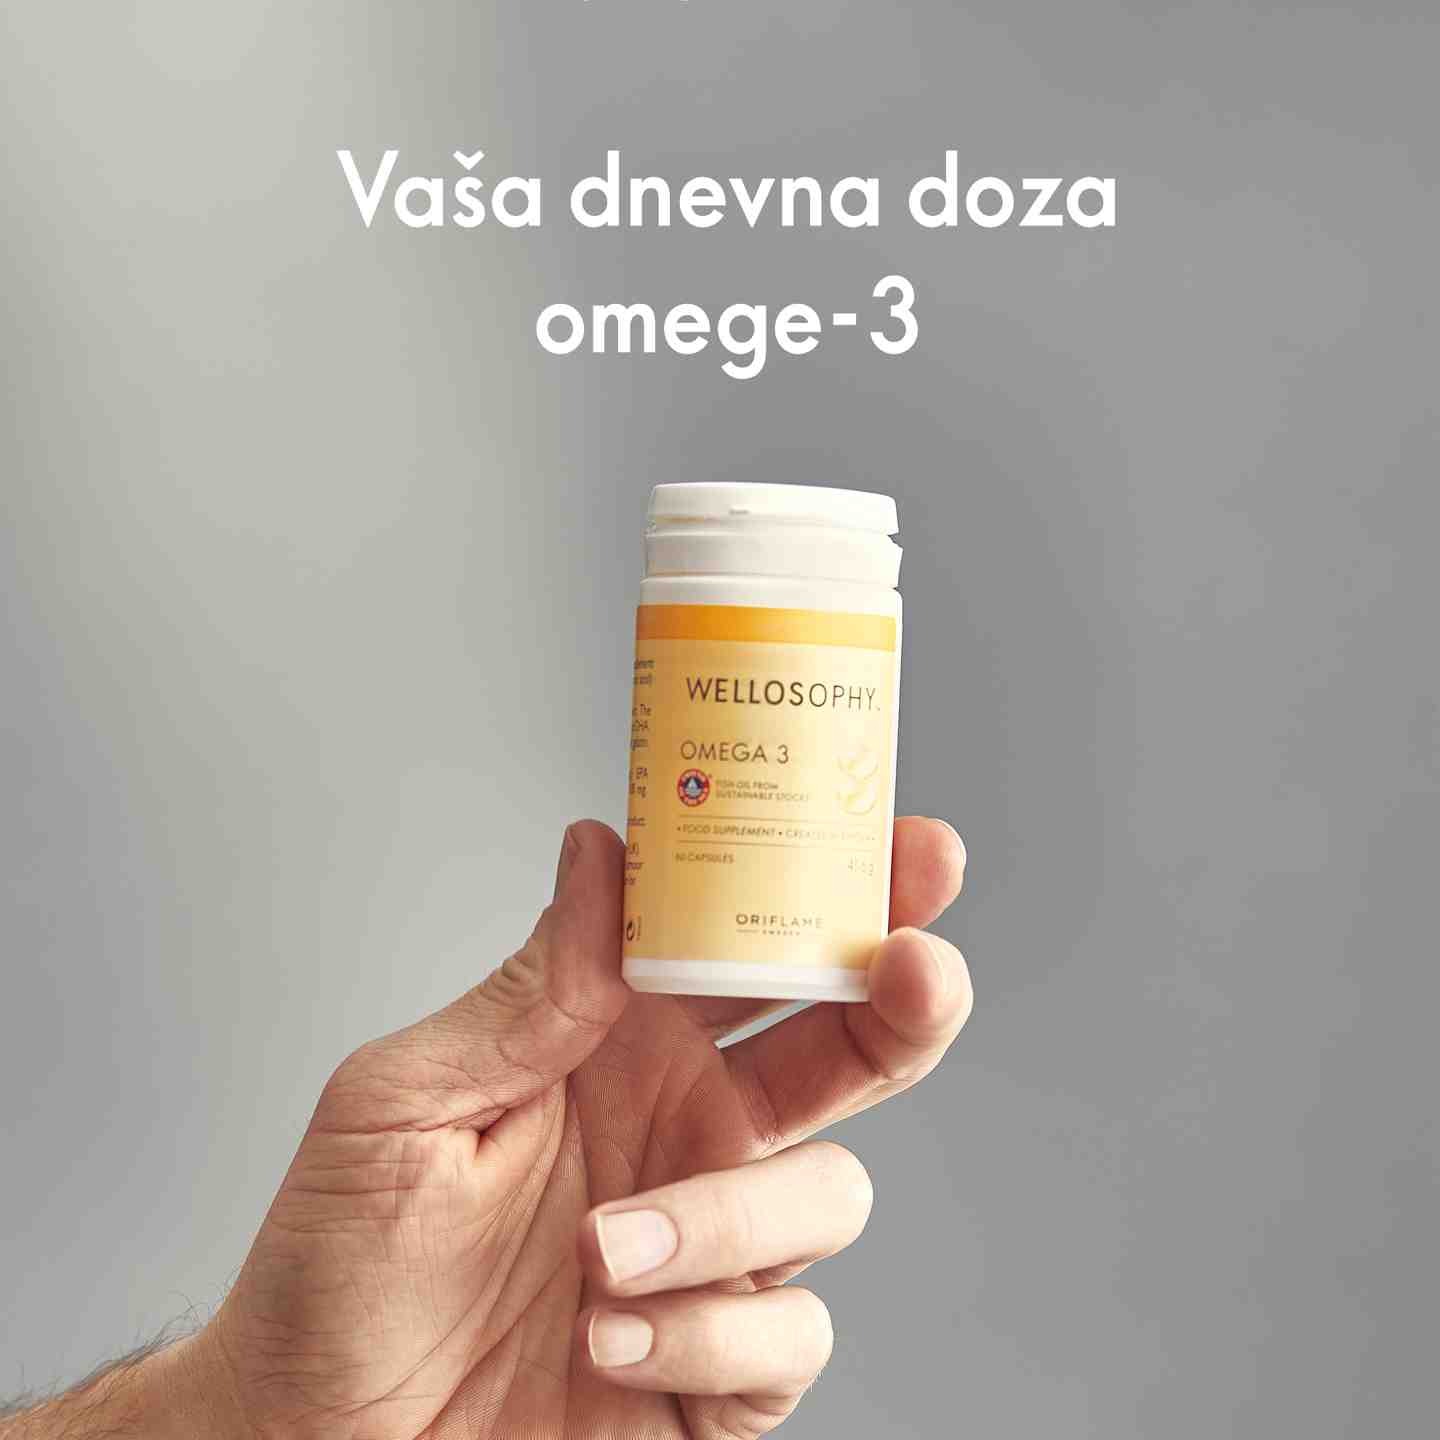 https://media-cdn.oriflame.com/productImage?externalMediaId=product-management-media%2fProducts%2f38556%2fHR%2f38556_3.png&id=18190230&version=1